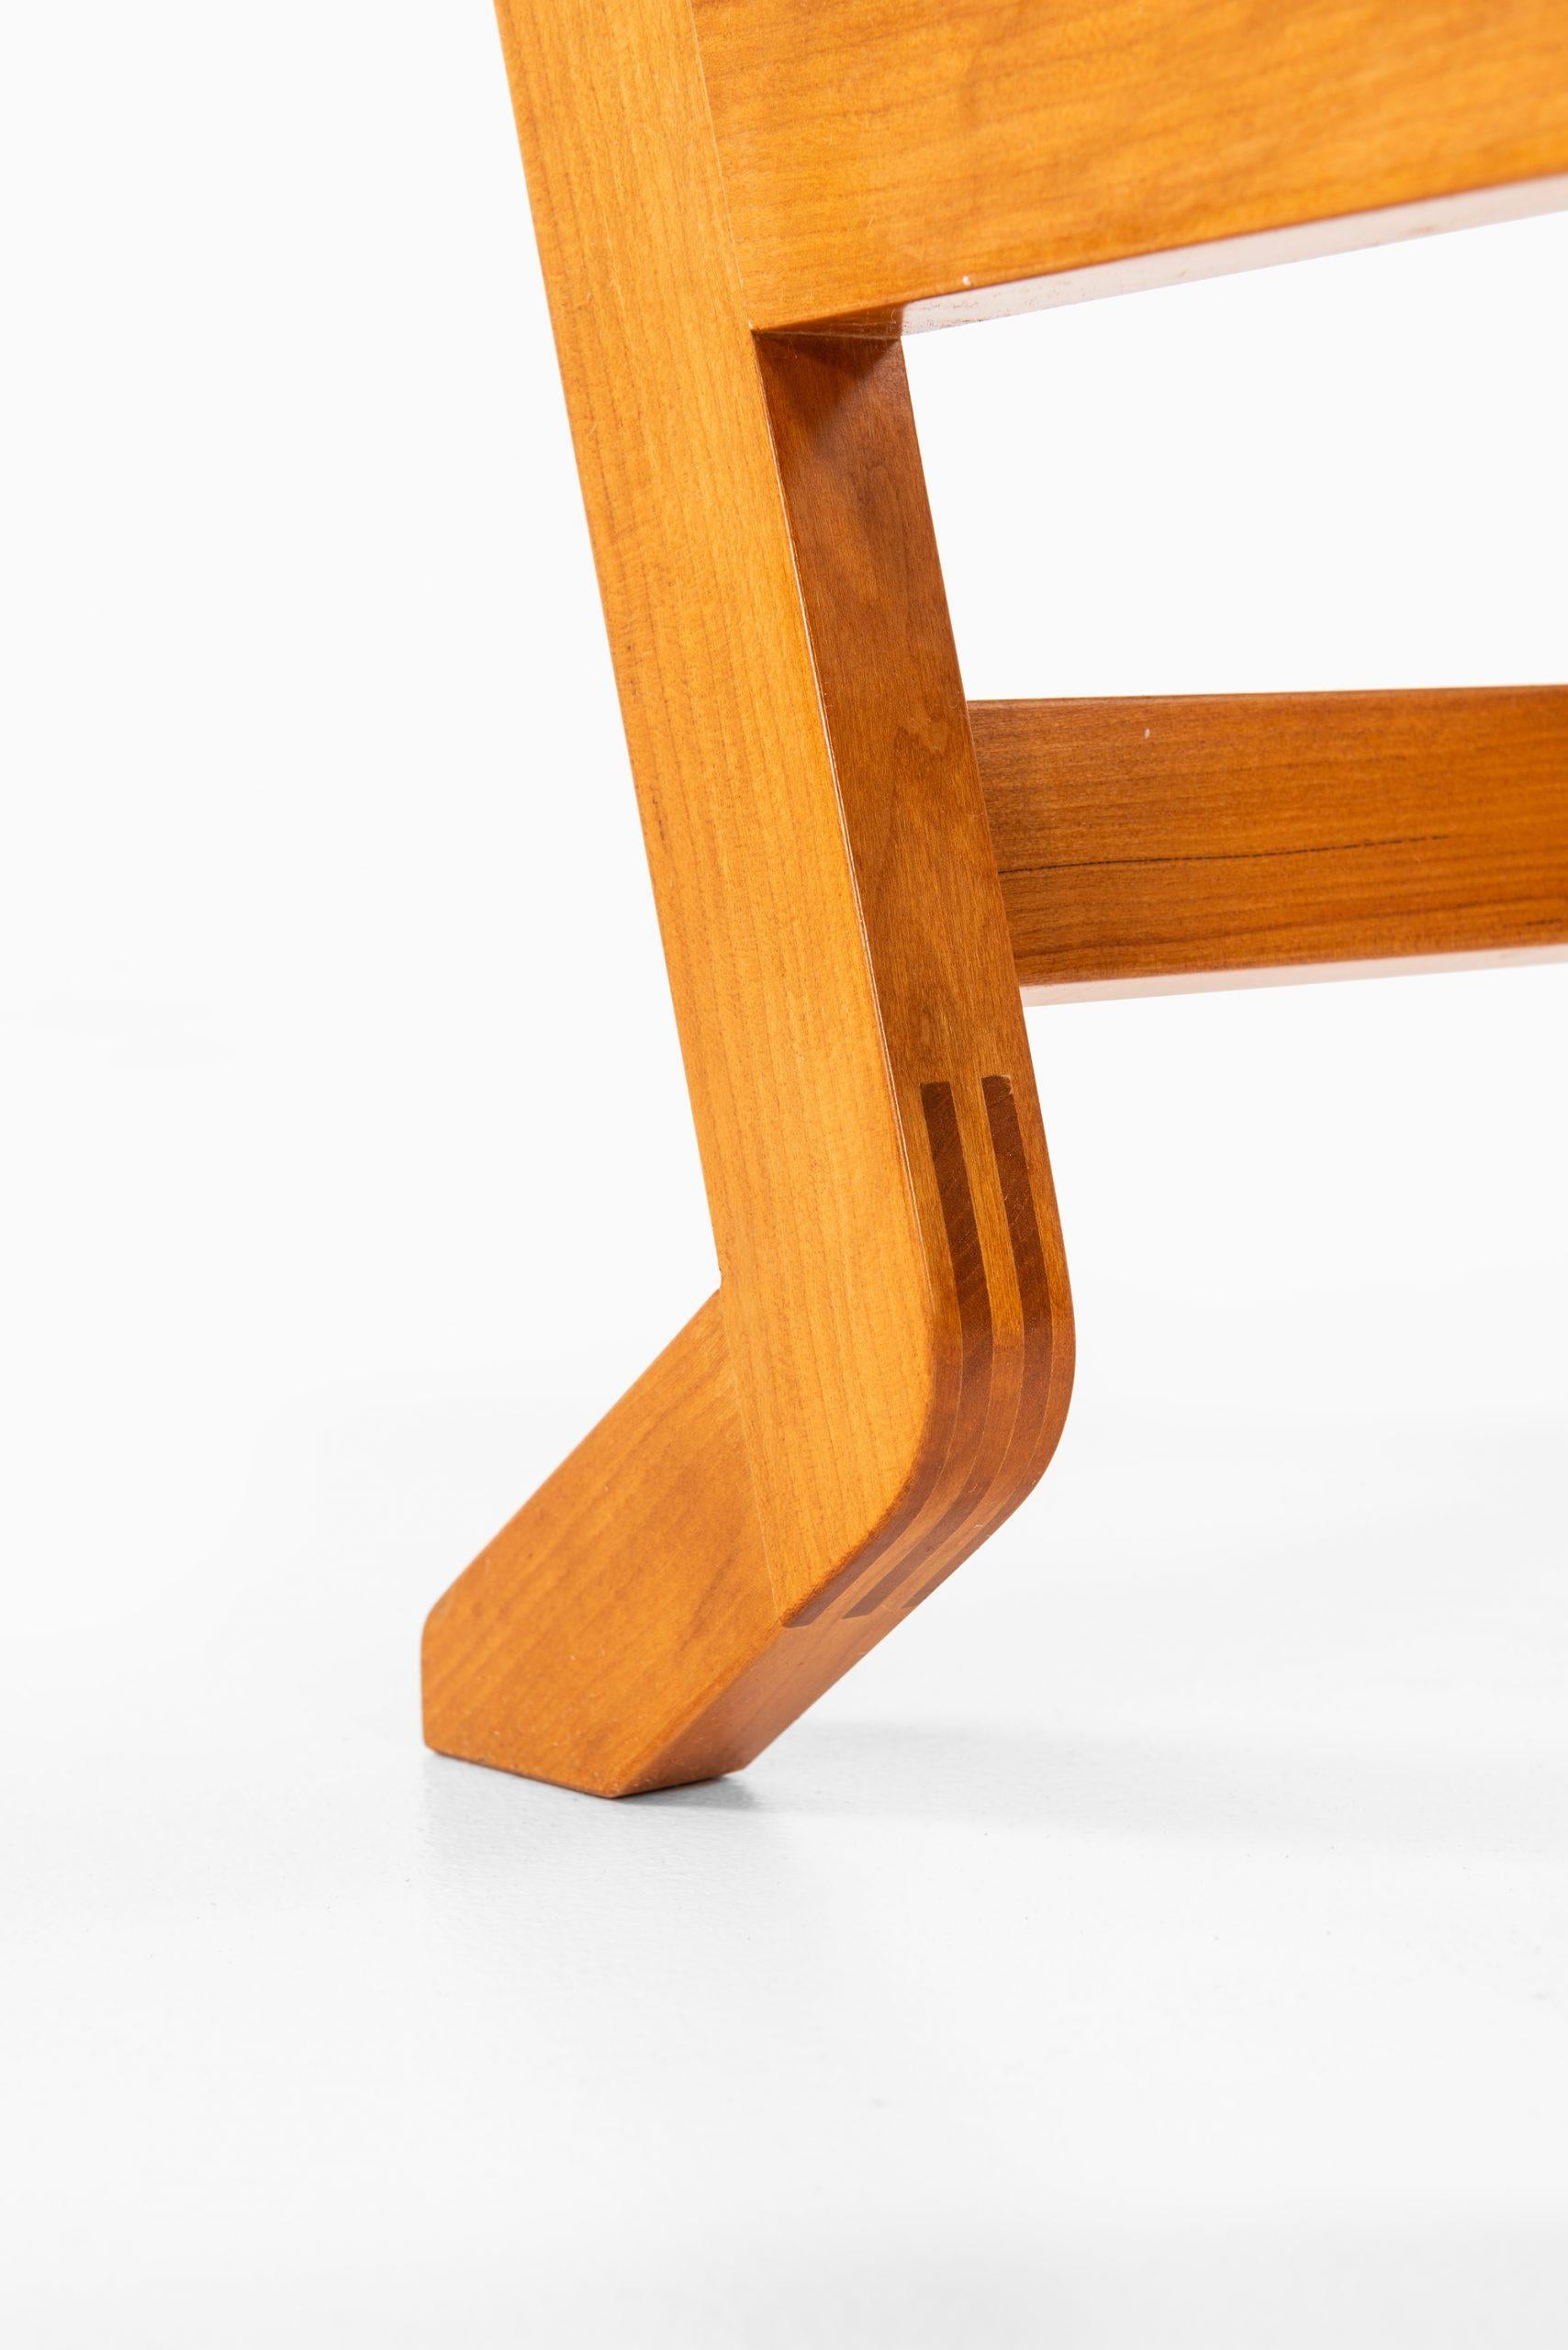 Danish Chairs Attributed to Helge Vestergaard-Jensen by Cabinetmaker Thysen Nielsen For Sale